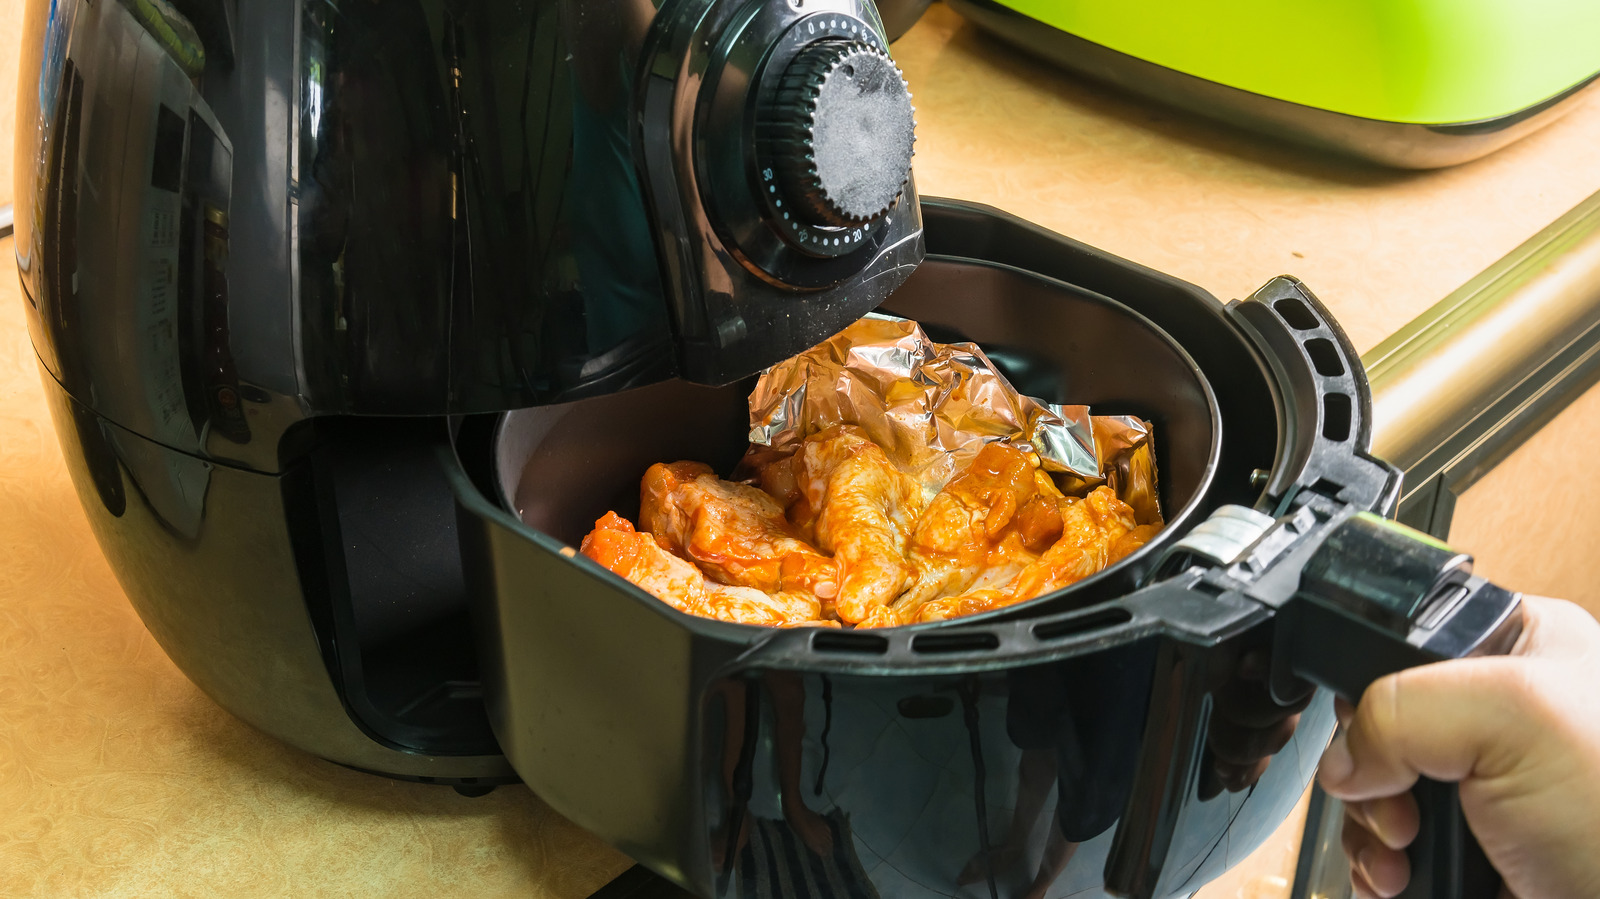 How To Reheat Food In An Air Fryer